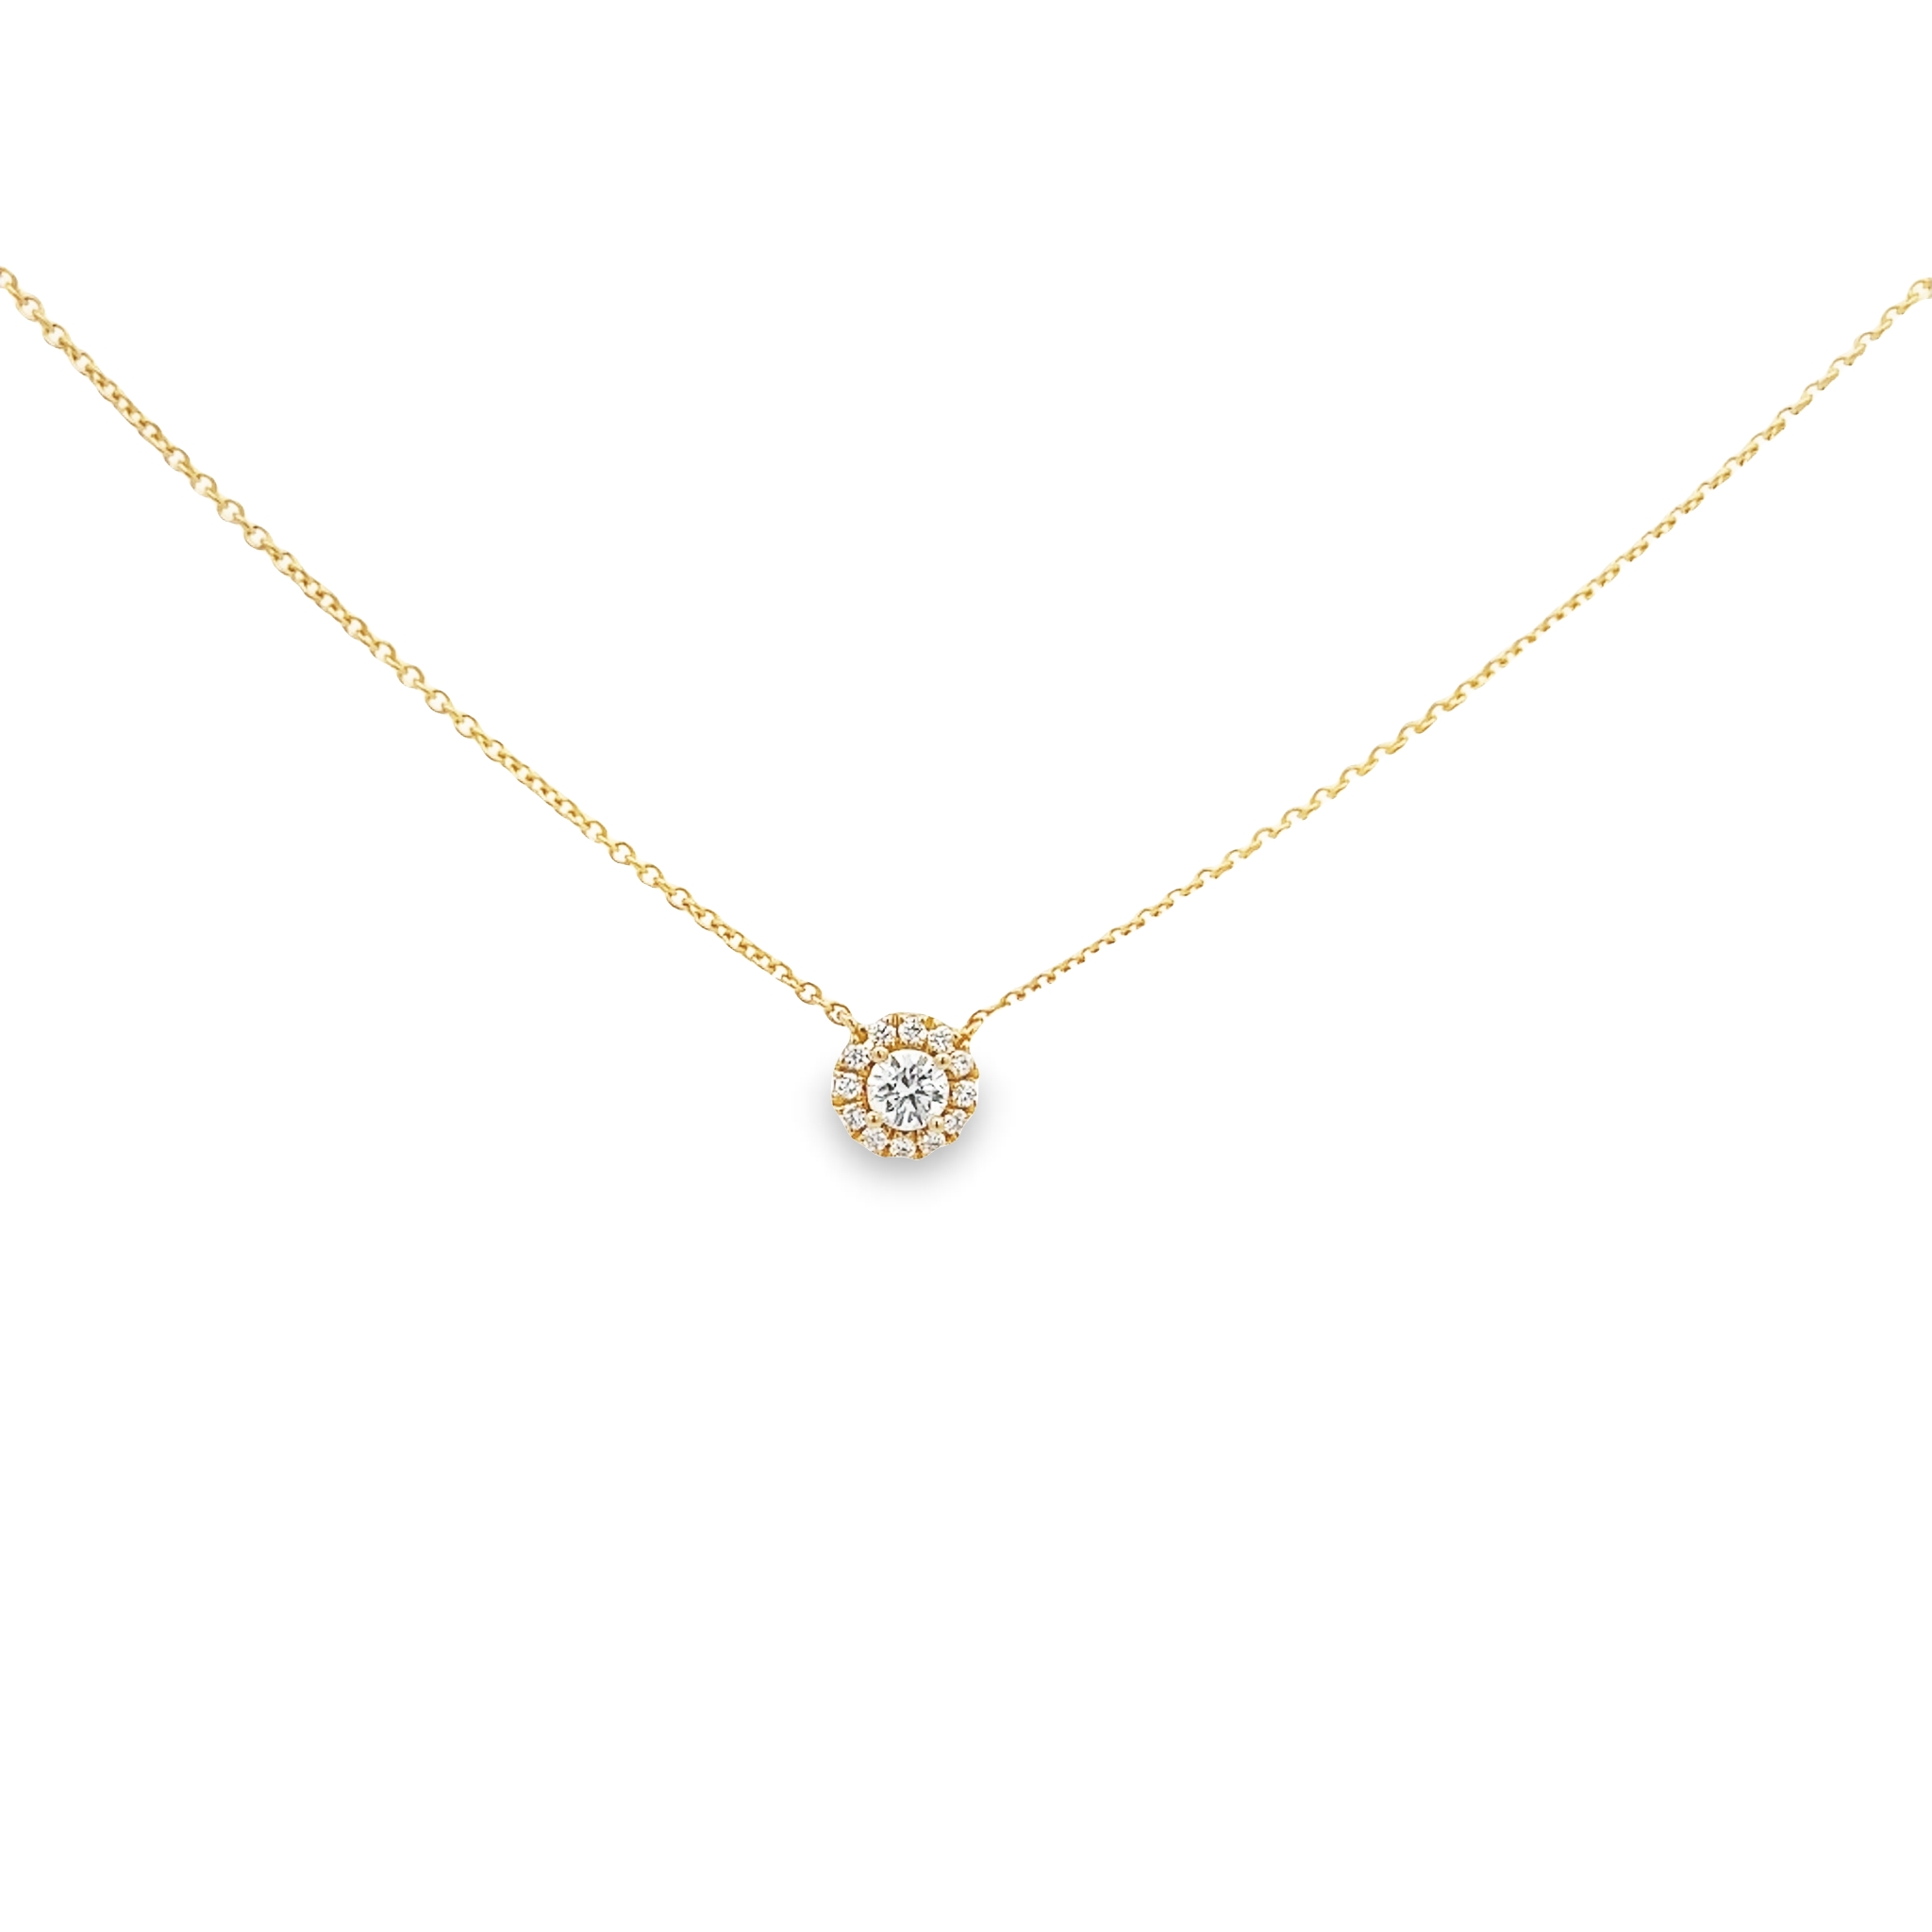 14 karat yellow gold halo solitaire necklace with one 0.25ct round brilliant G VS Diamond and 12=0.12tw round brilliant G VS Diamonds